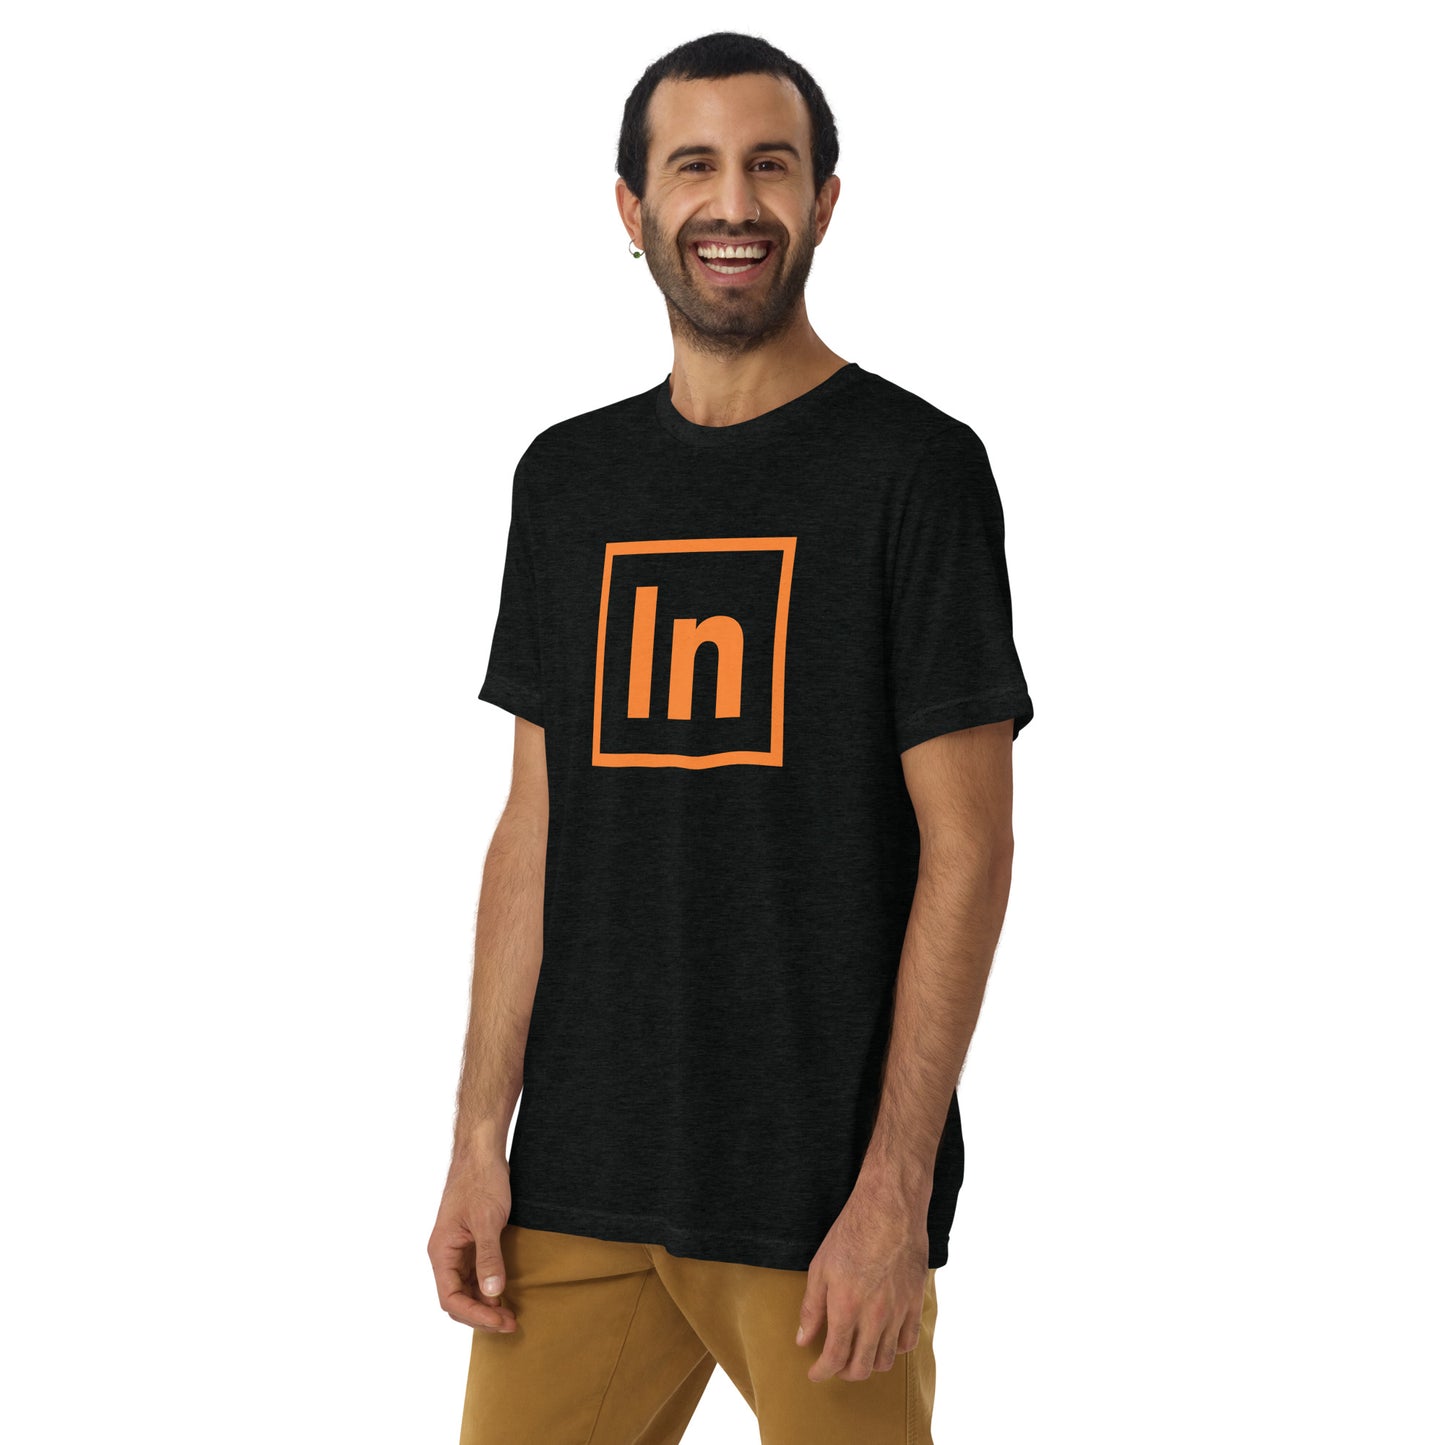 Extra-soft Triblend T-shirt - "In"